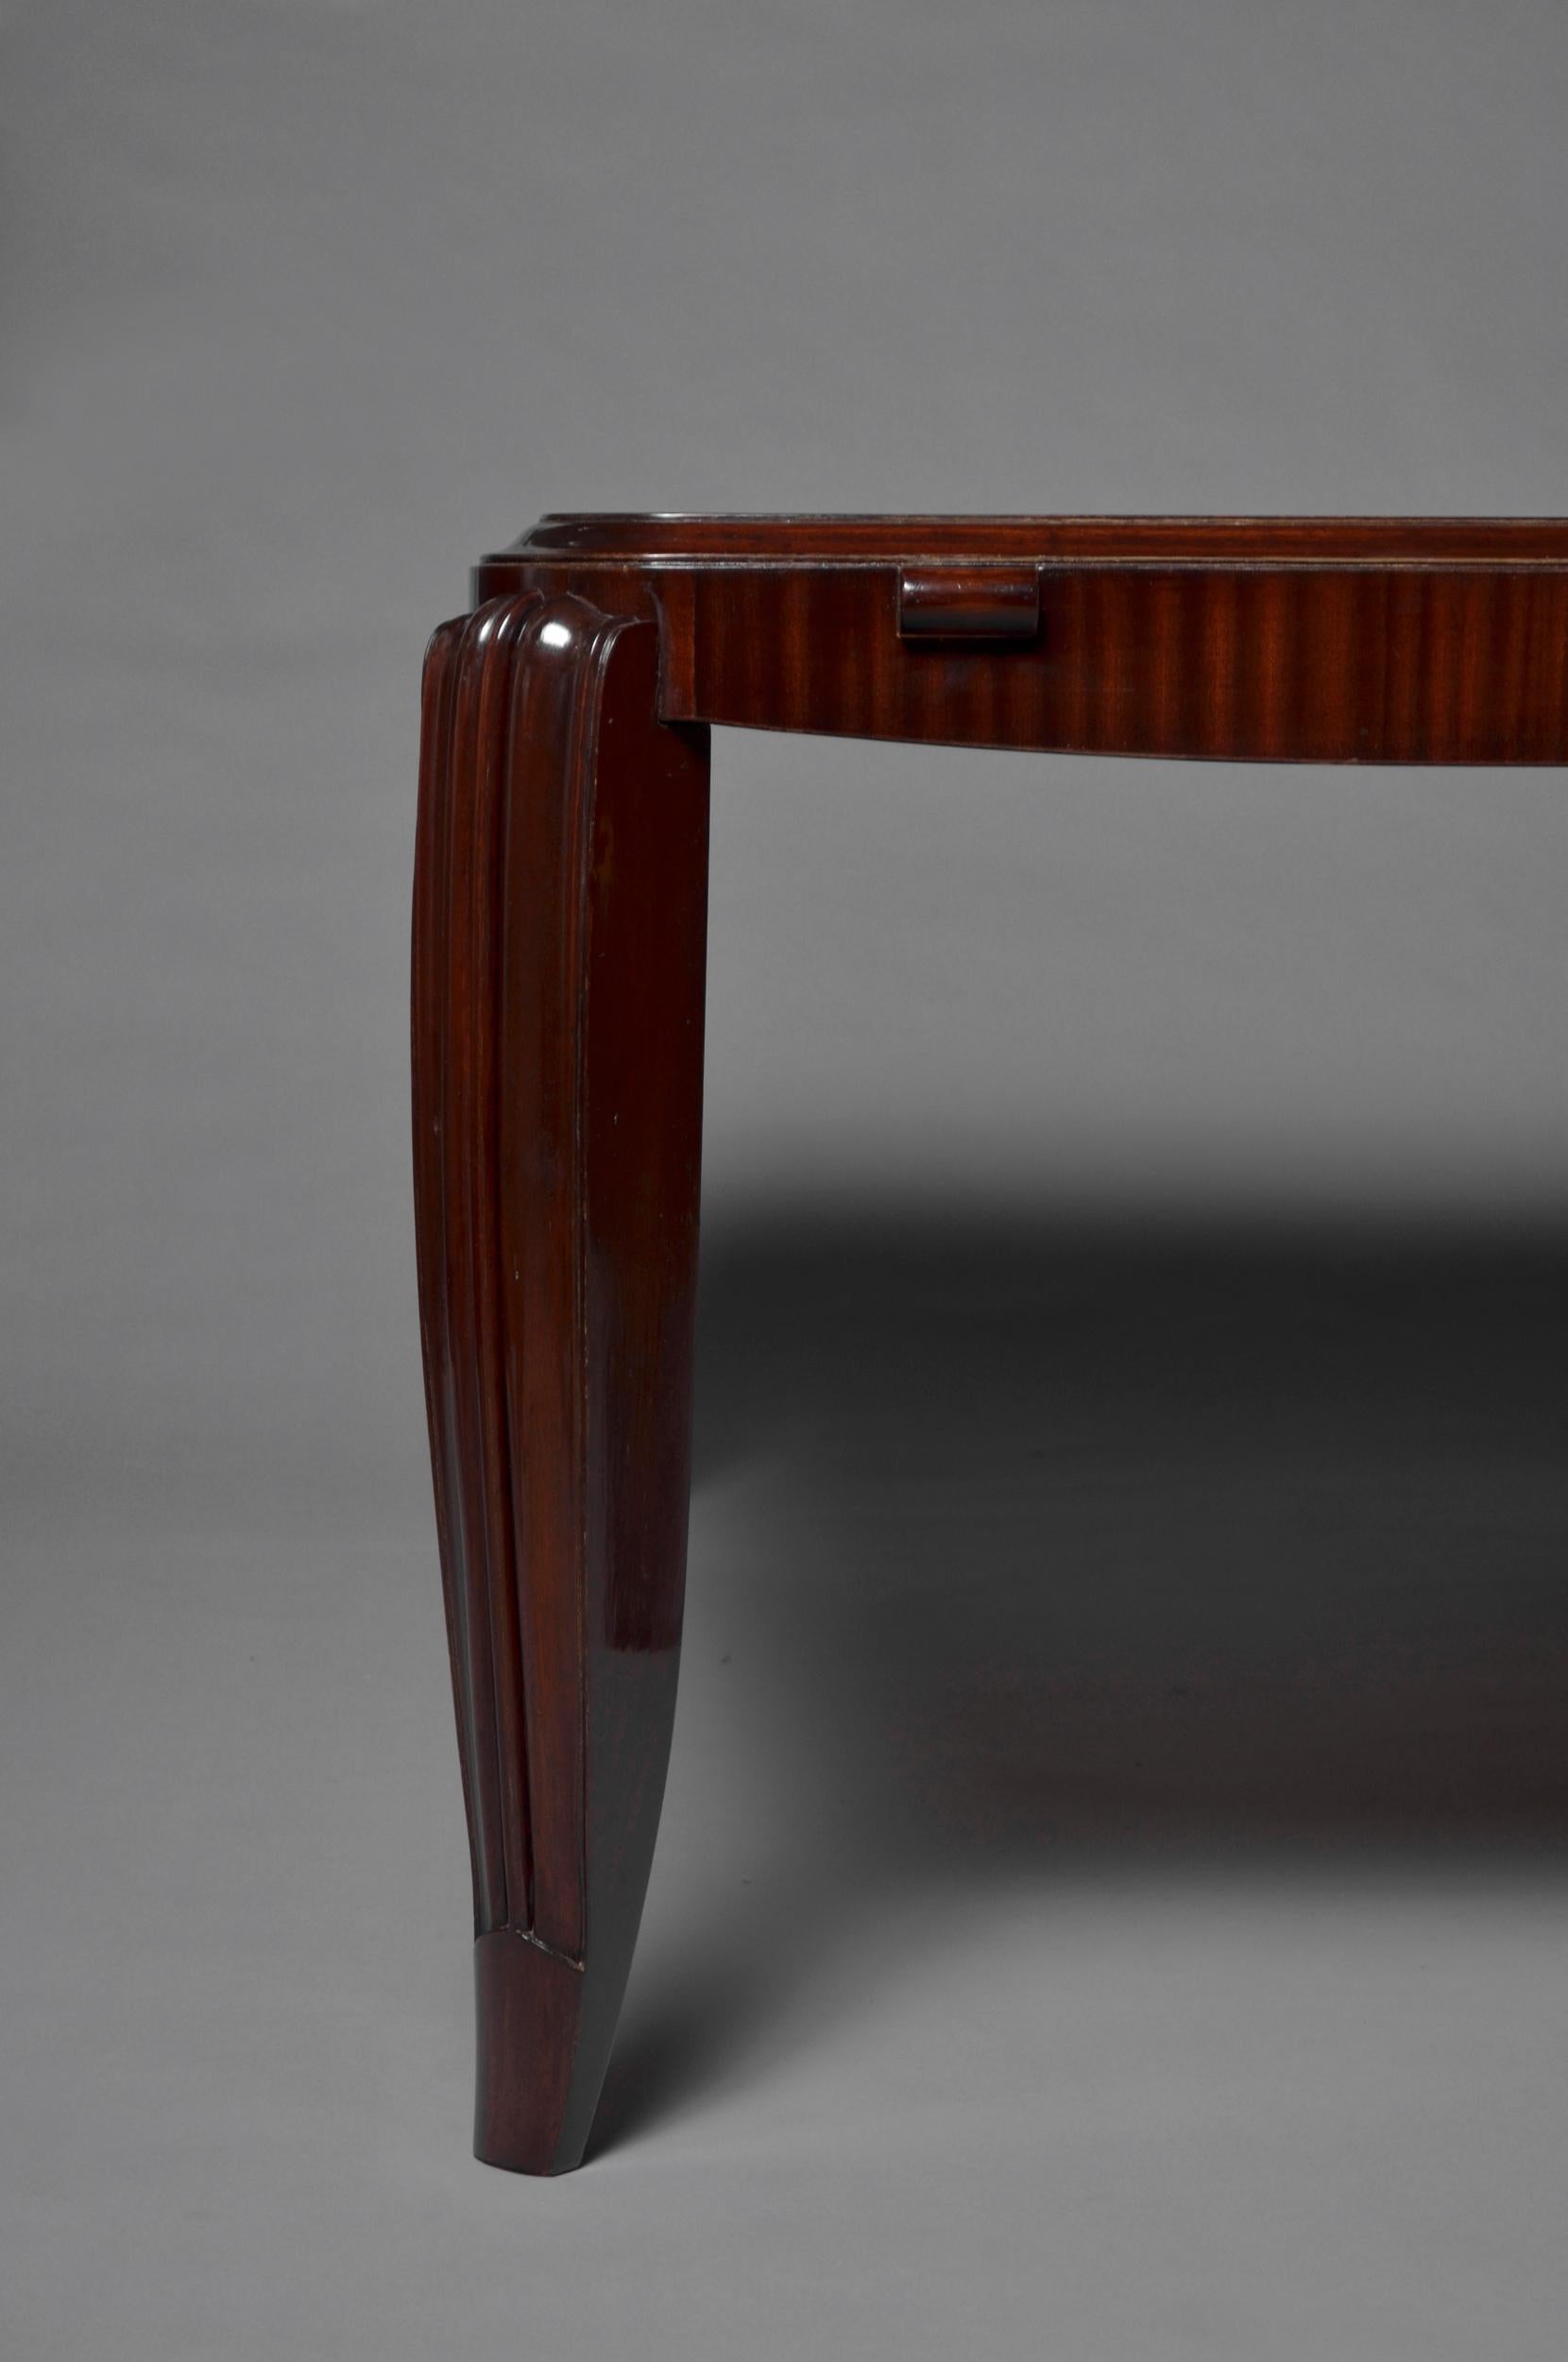 A Fine French Art Deco Mahogany Dining Table in the manner of Jean Pascaud For Sale 6